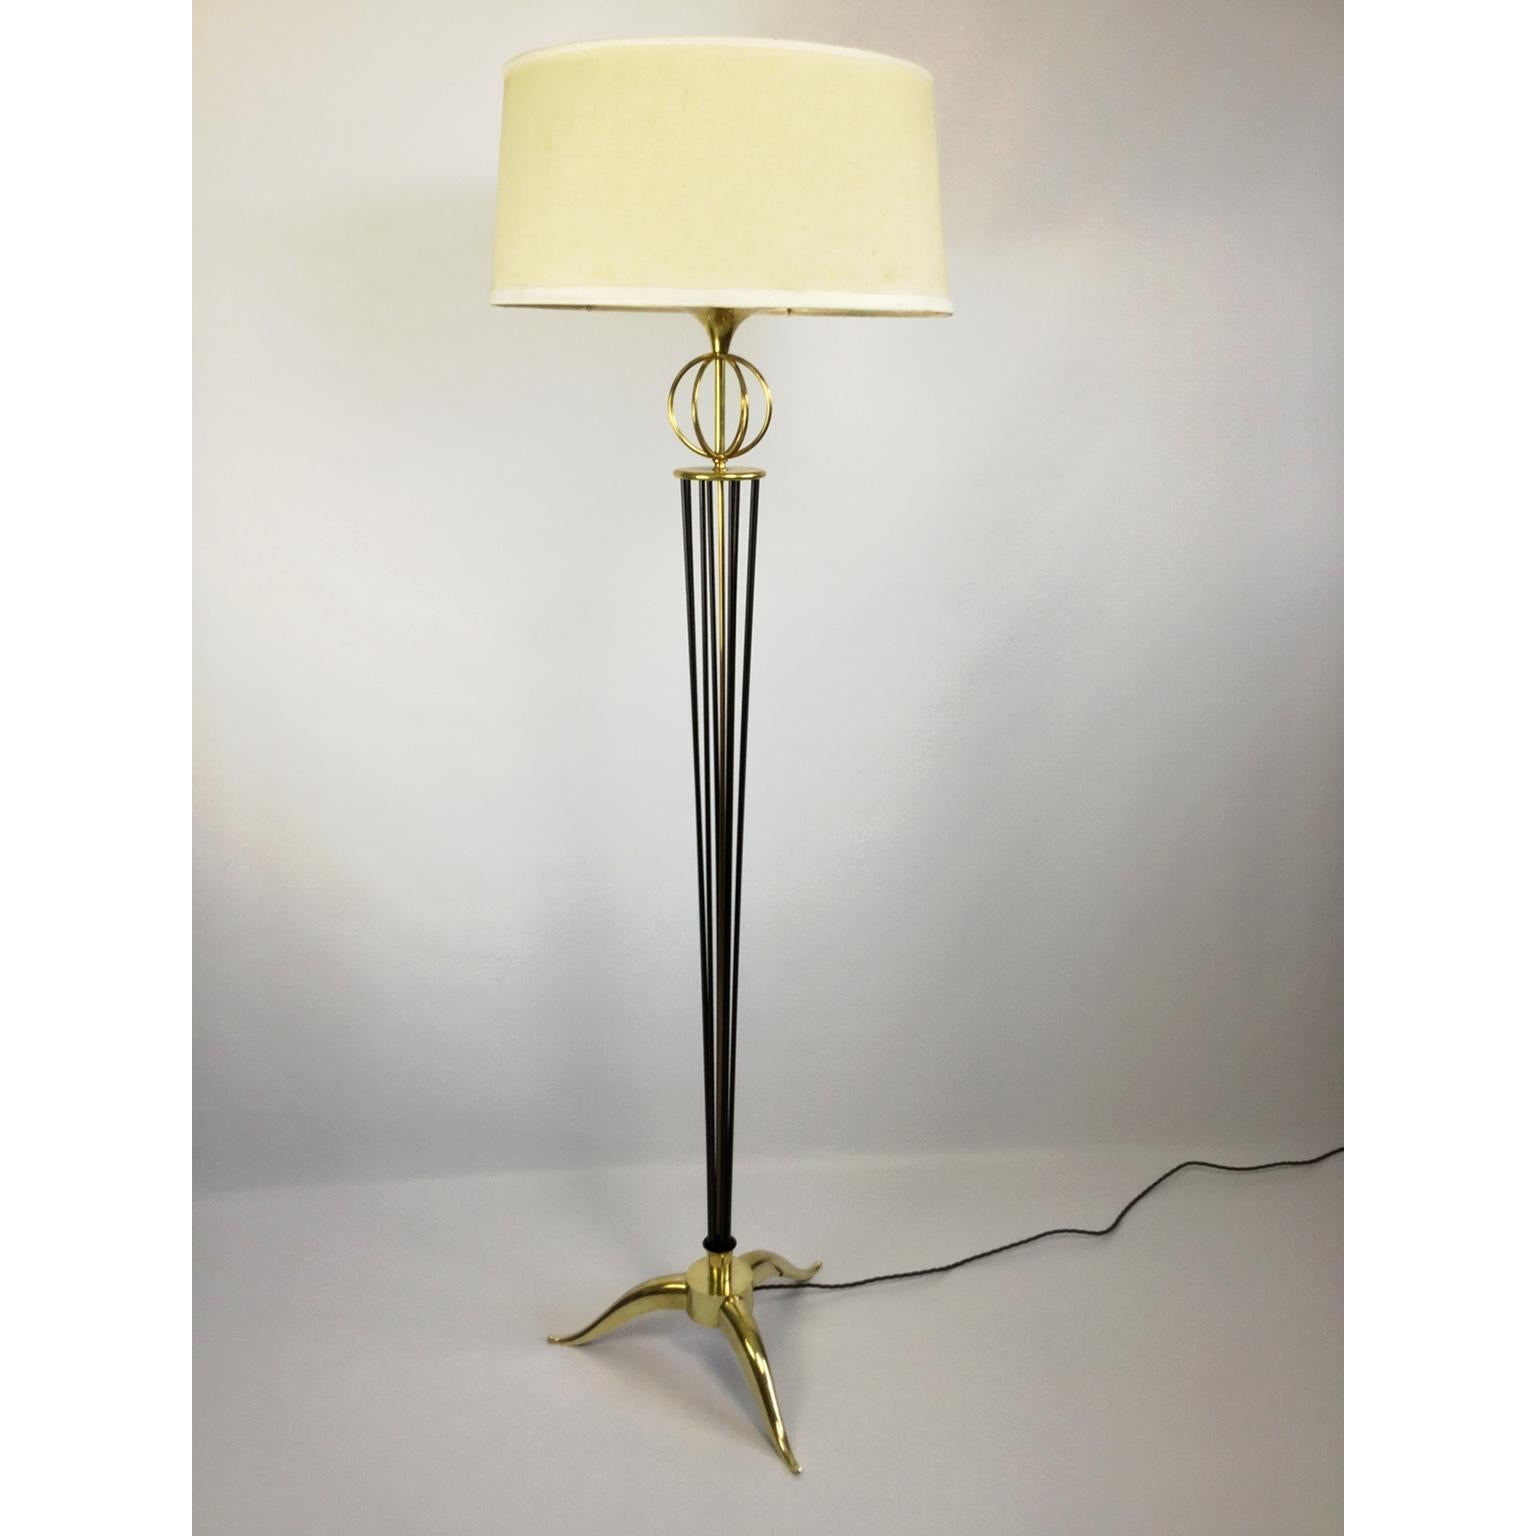 Mid-20th Century French Brass and Glass Floor Lamp by Maison Arlus, 1950s